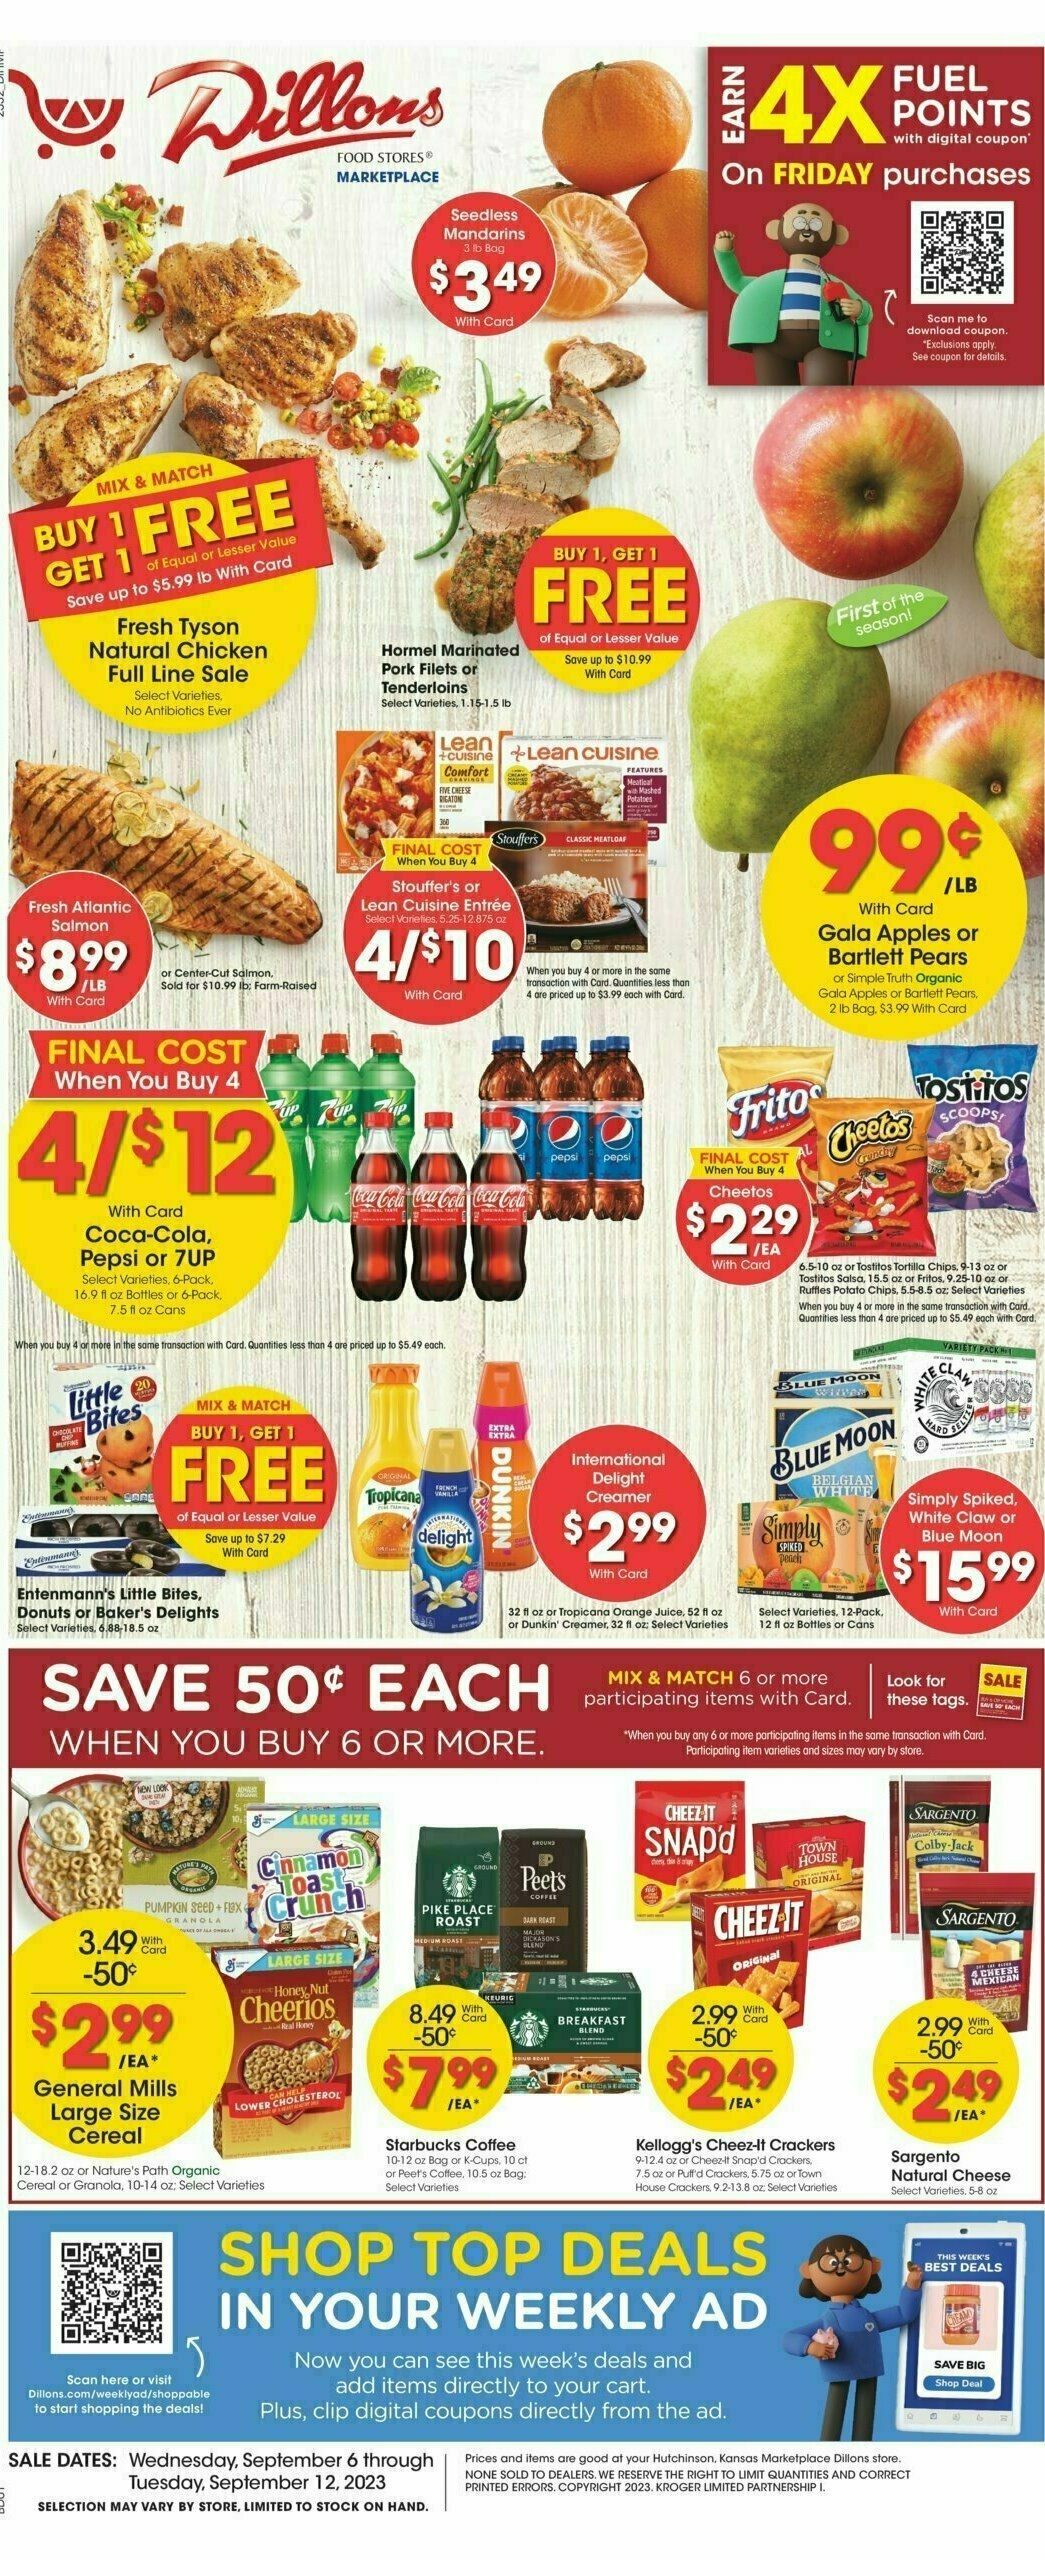 Dillons Weekly Ad from September 6